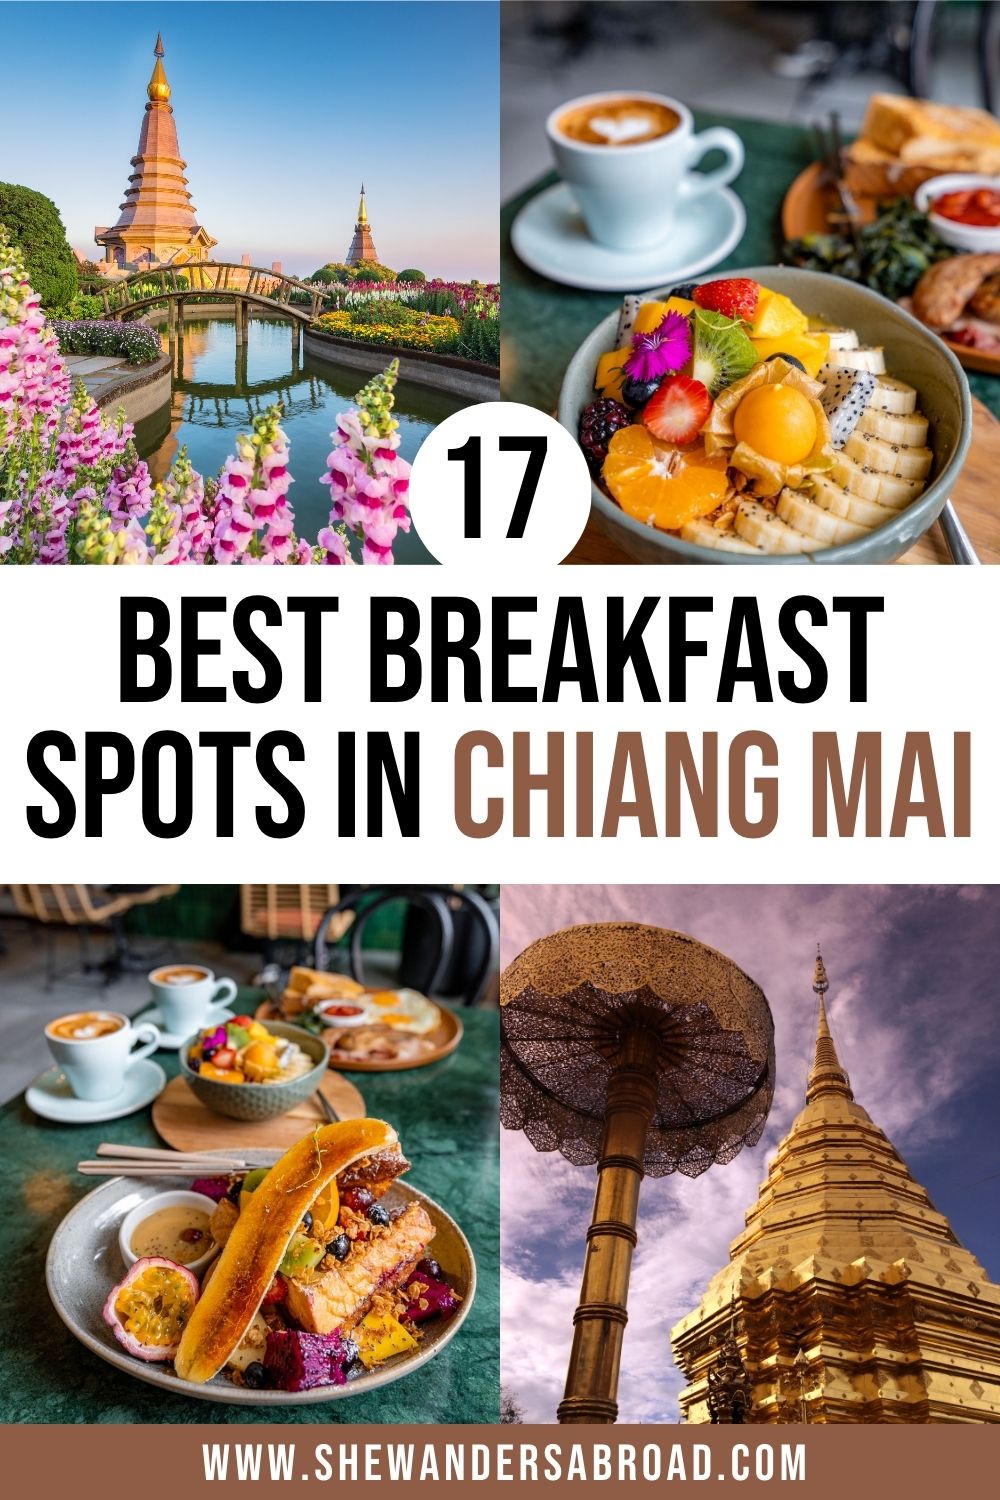 Breakfast in Chiang Mai: 17 Best Cafes You Need to Try